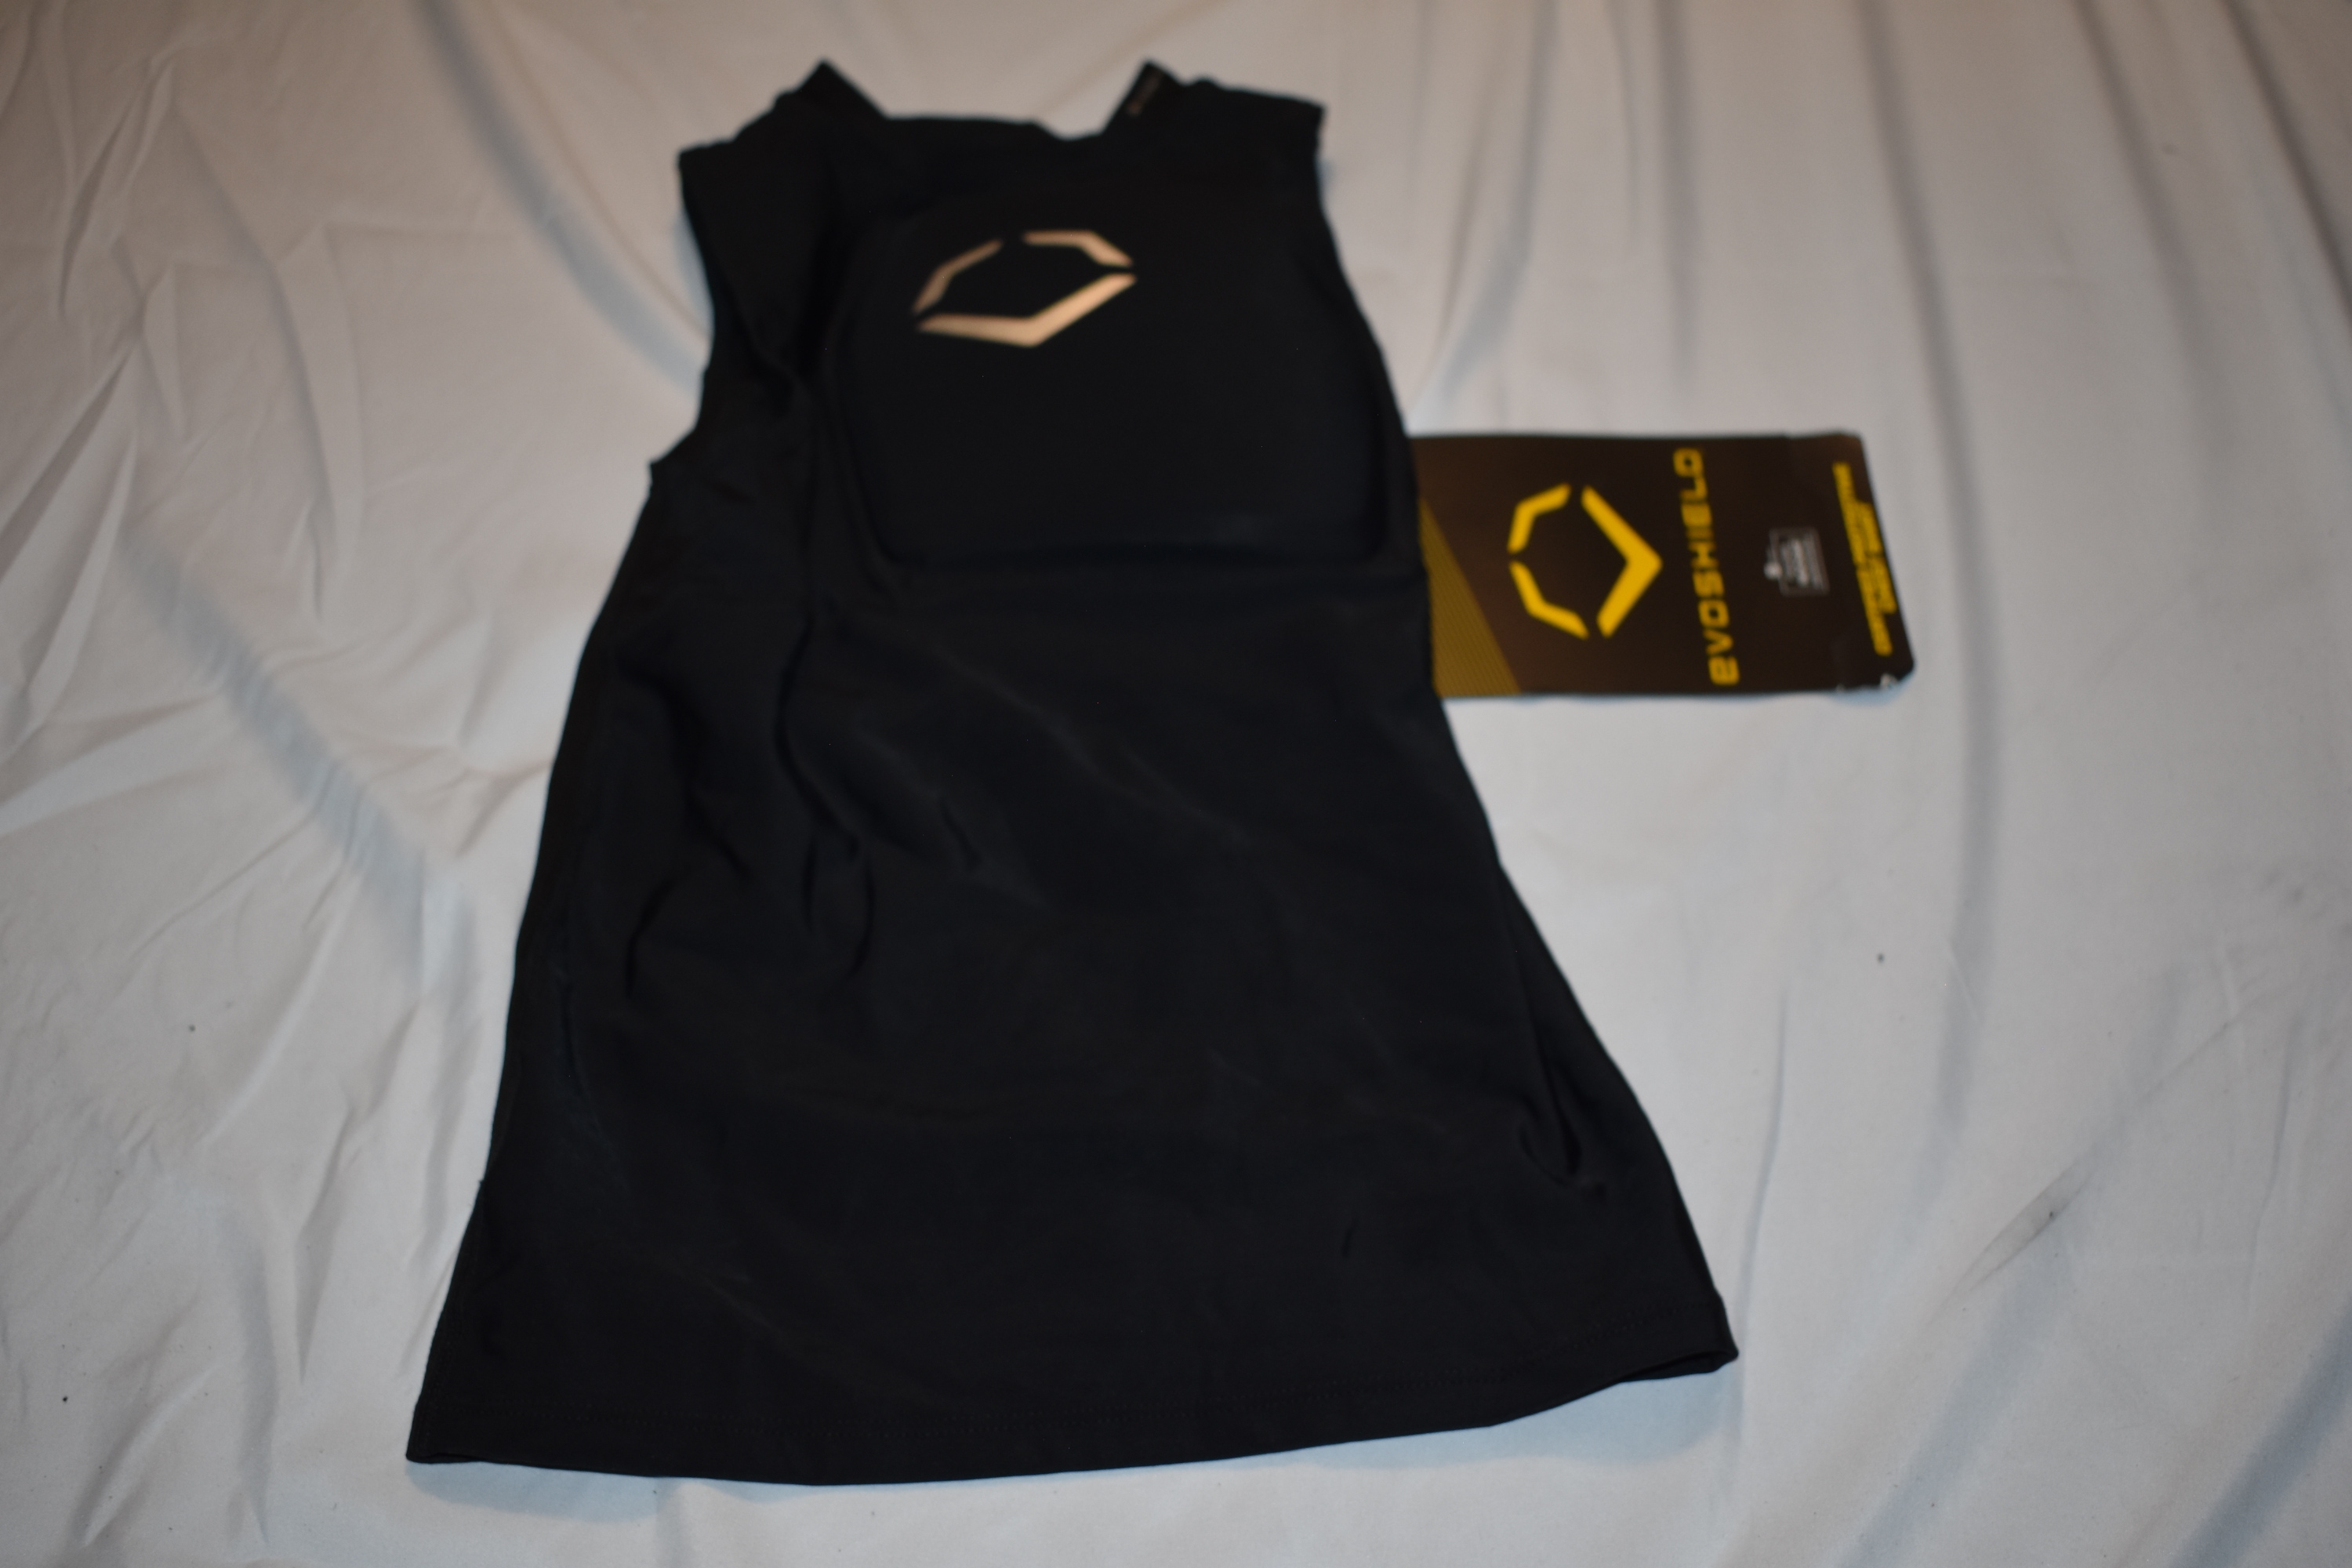 NEW - Evoshield Youth NOCSAE Protective Chest Guard Shirt, Youth Small